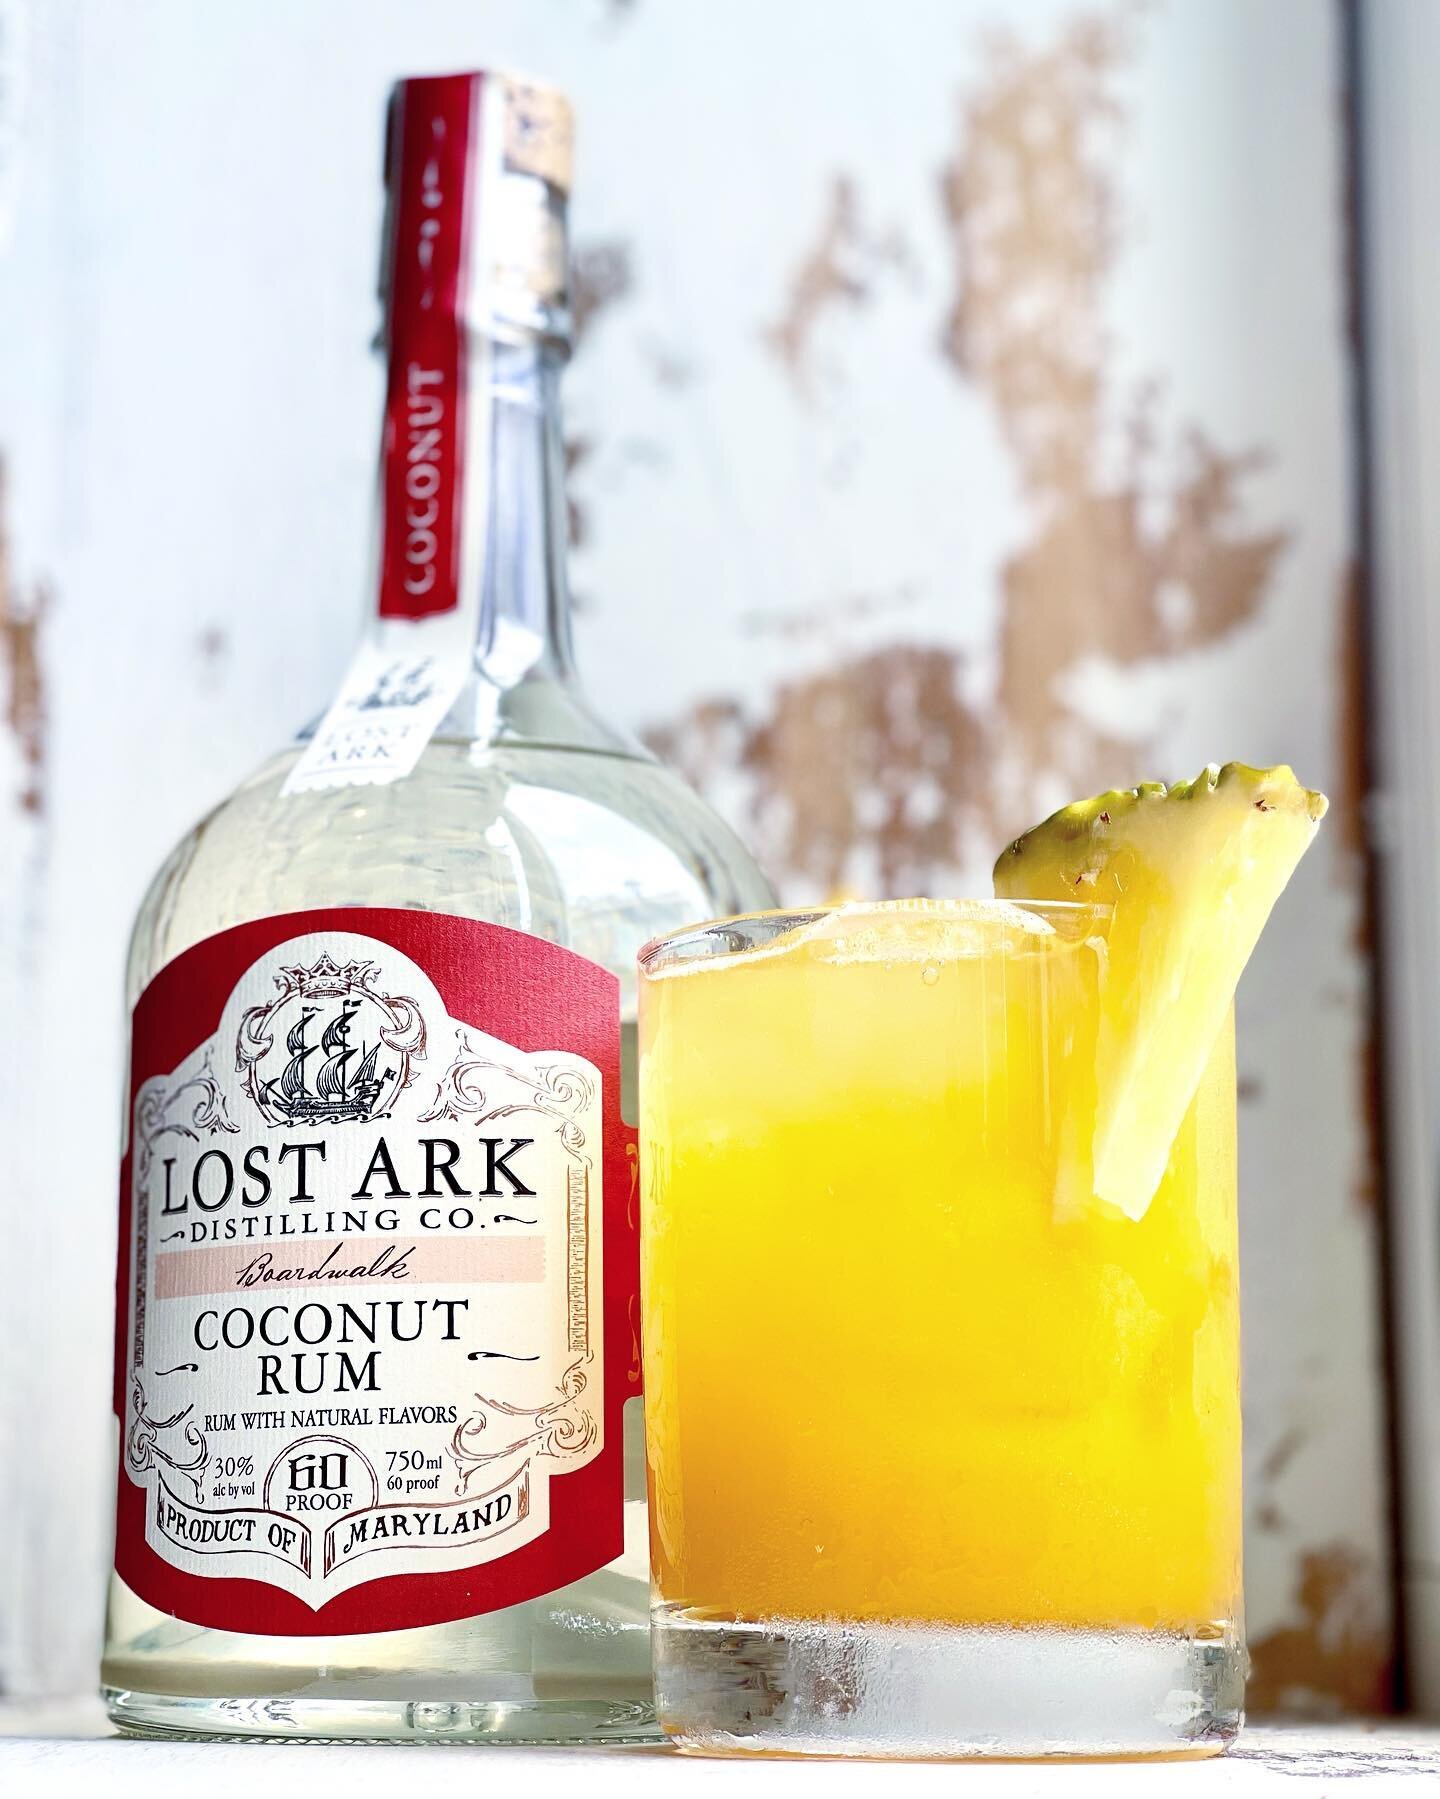 Don&rsquo;t forget our ‼️COMPLEMENTARY‼️ Lost Ark Tasting ‼️TONIGHT‼️ from 6️⃣pm - 8️⃣pm 
🥳
Oh&hellip;and did we mention that it&rsquo;s ✨complementary✨?

&bull;
&bull;
&bull;

#baltimorebuzz #mybmore #rum #rumcocktails #rumcocktail #rumdrinks #ruma